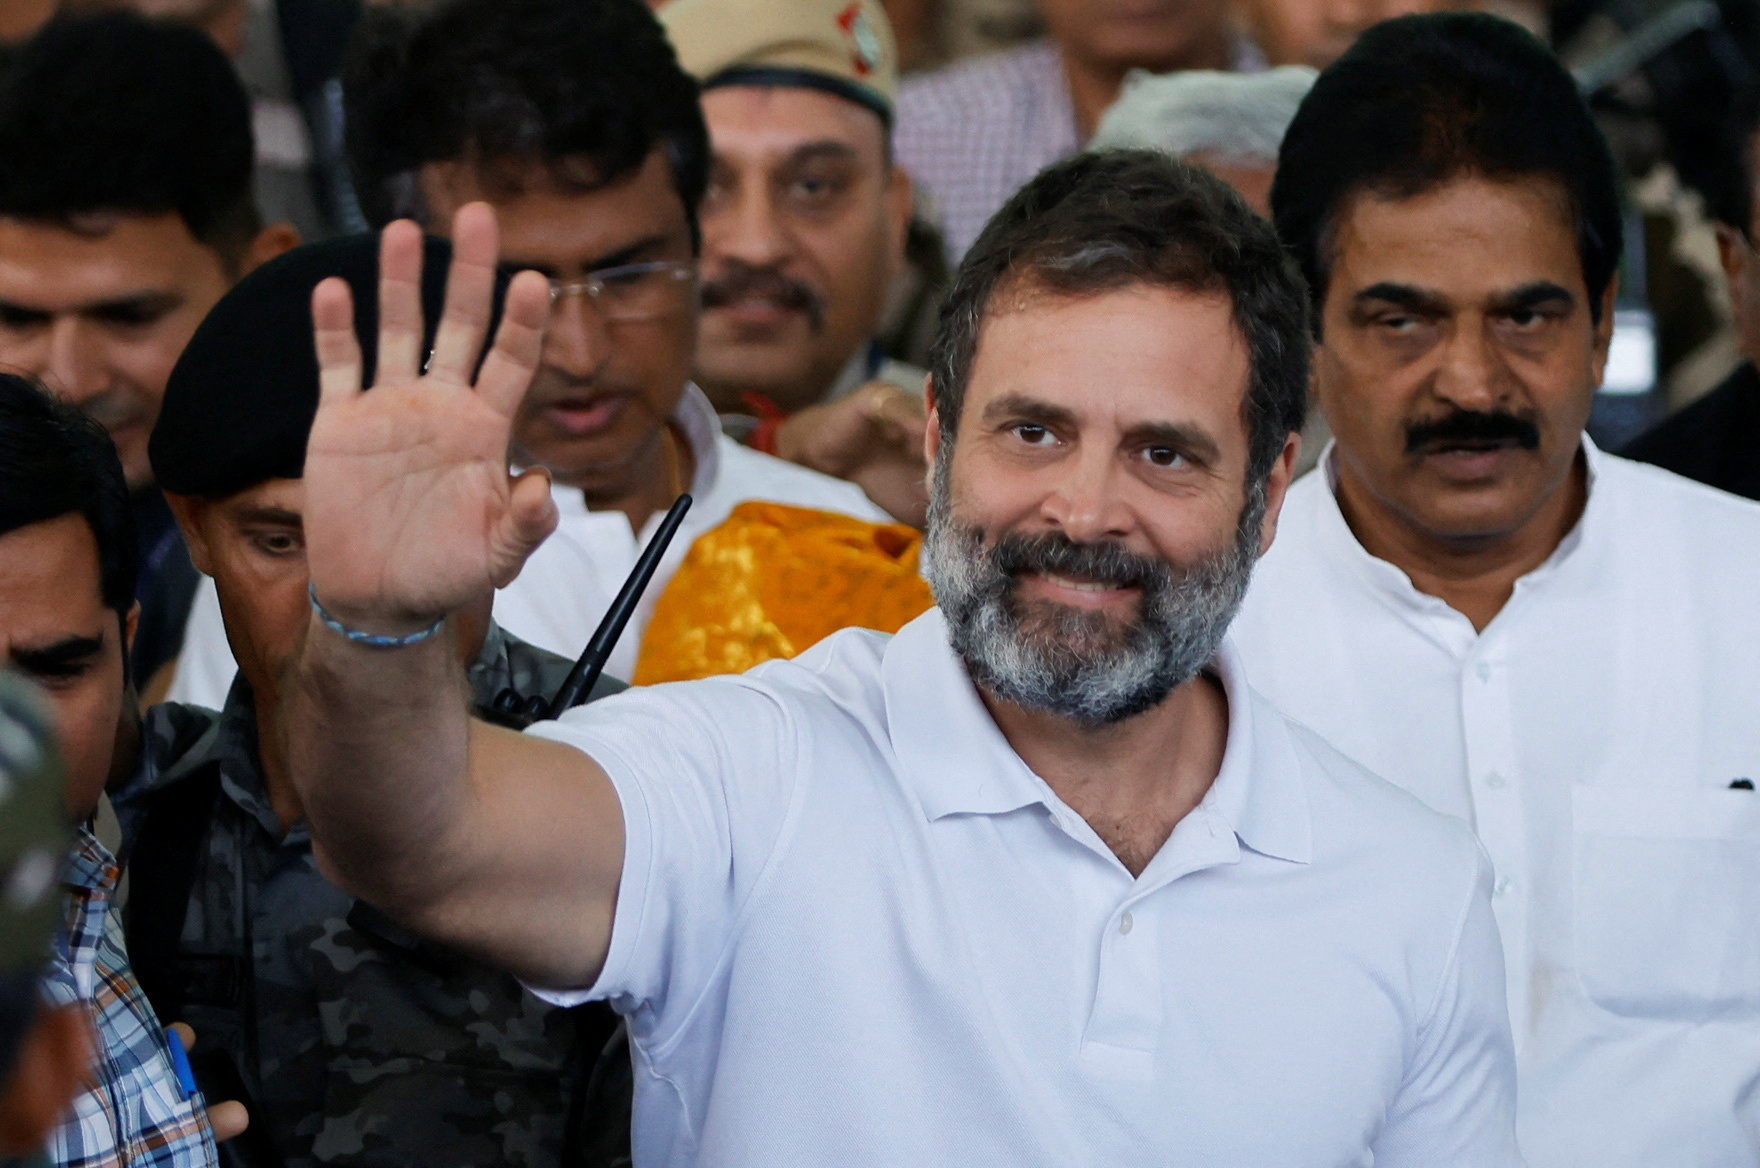 Rahul Gandhi, a senior leader of India's main opposition Congress party, arrives at the New Delhi airport